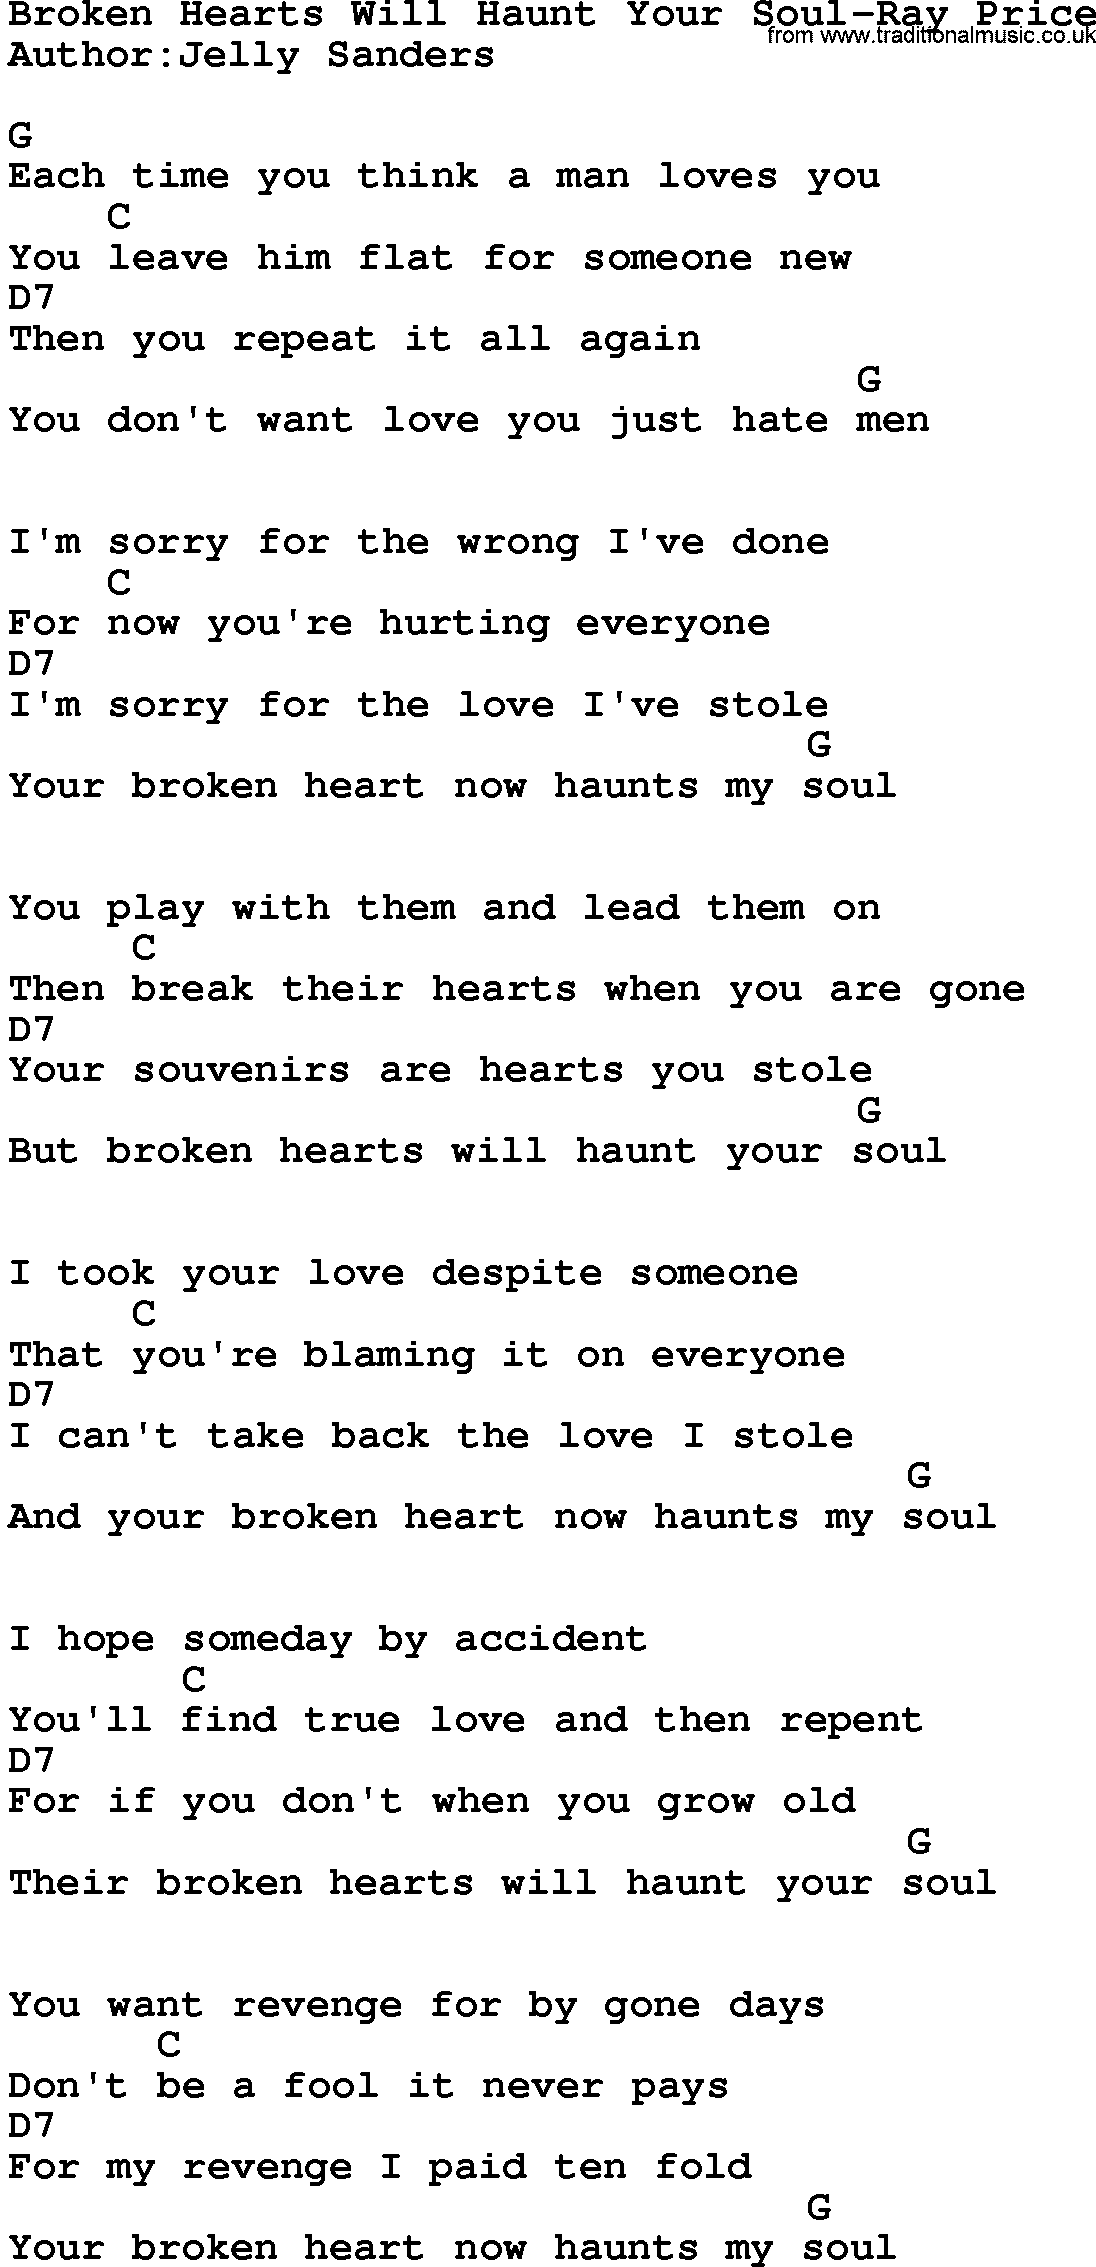 Country music song: Broken Hearts Will Haunt Your Soul-Ray Price lyrics and chords